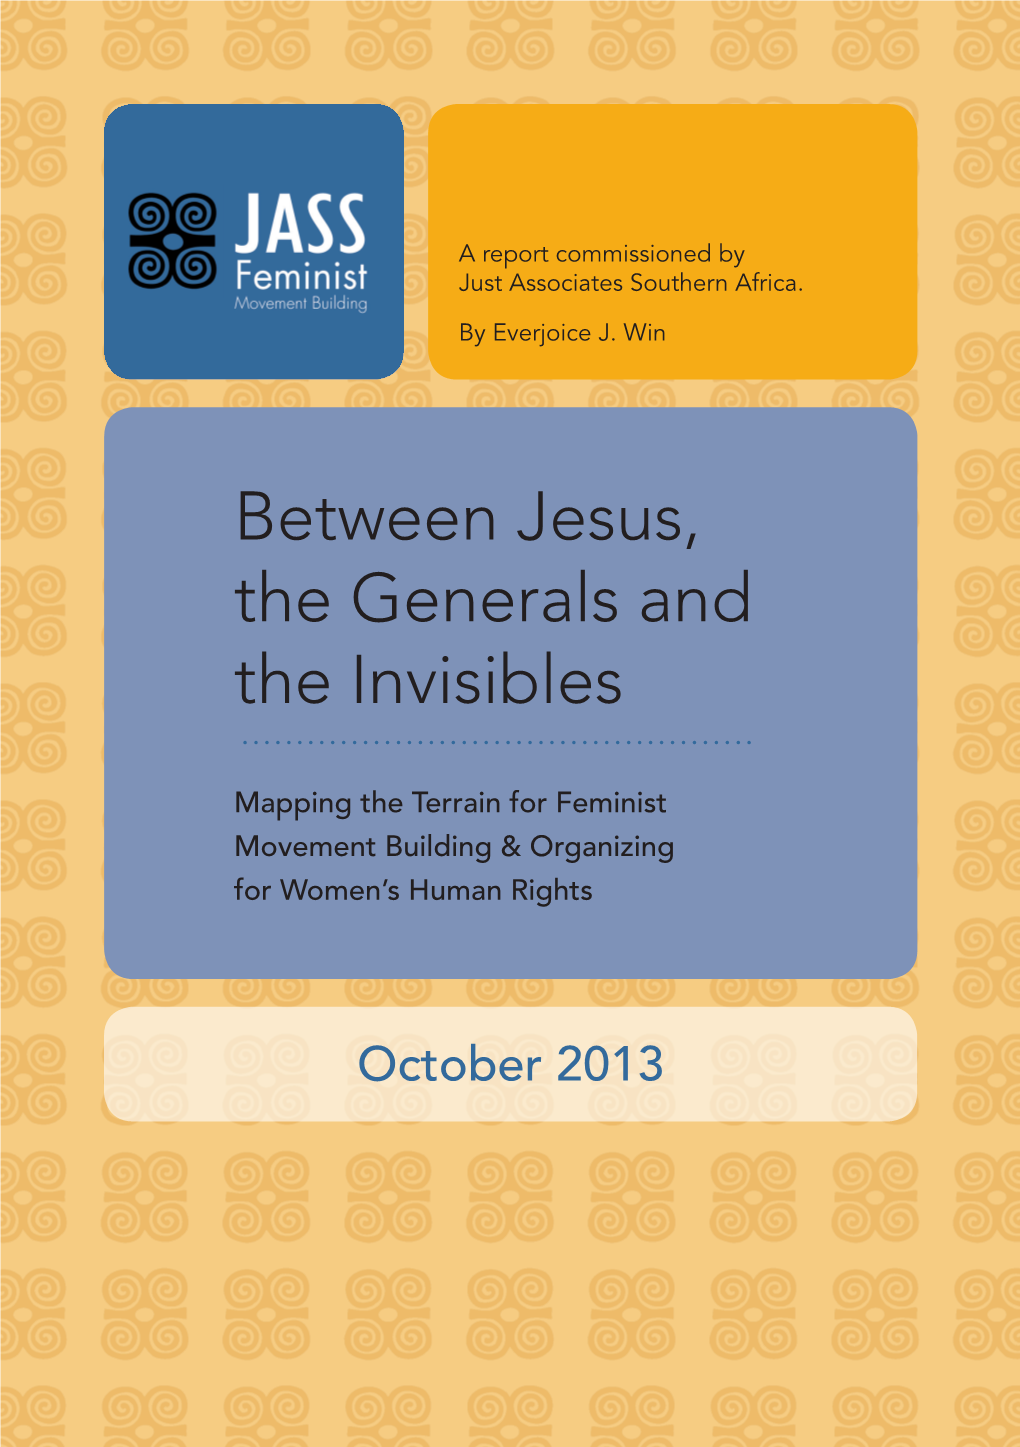 Between Jesus, the Generals and the Invisibles